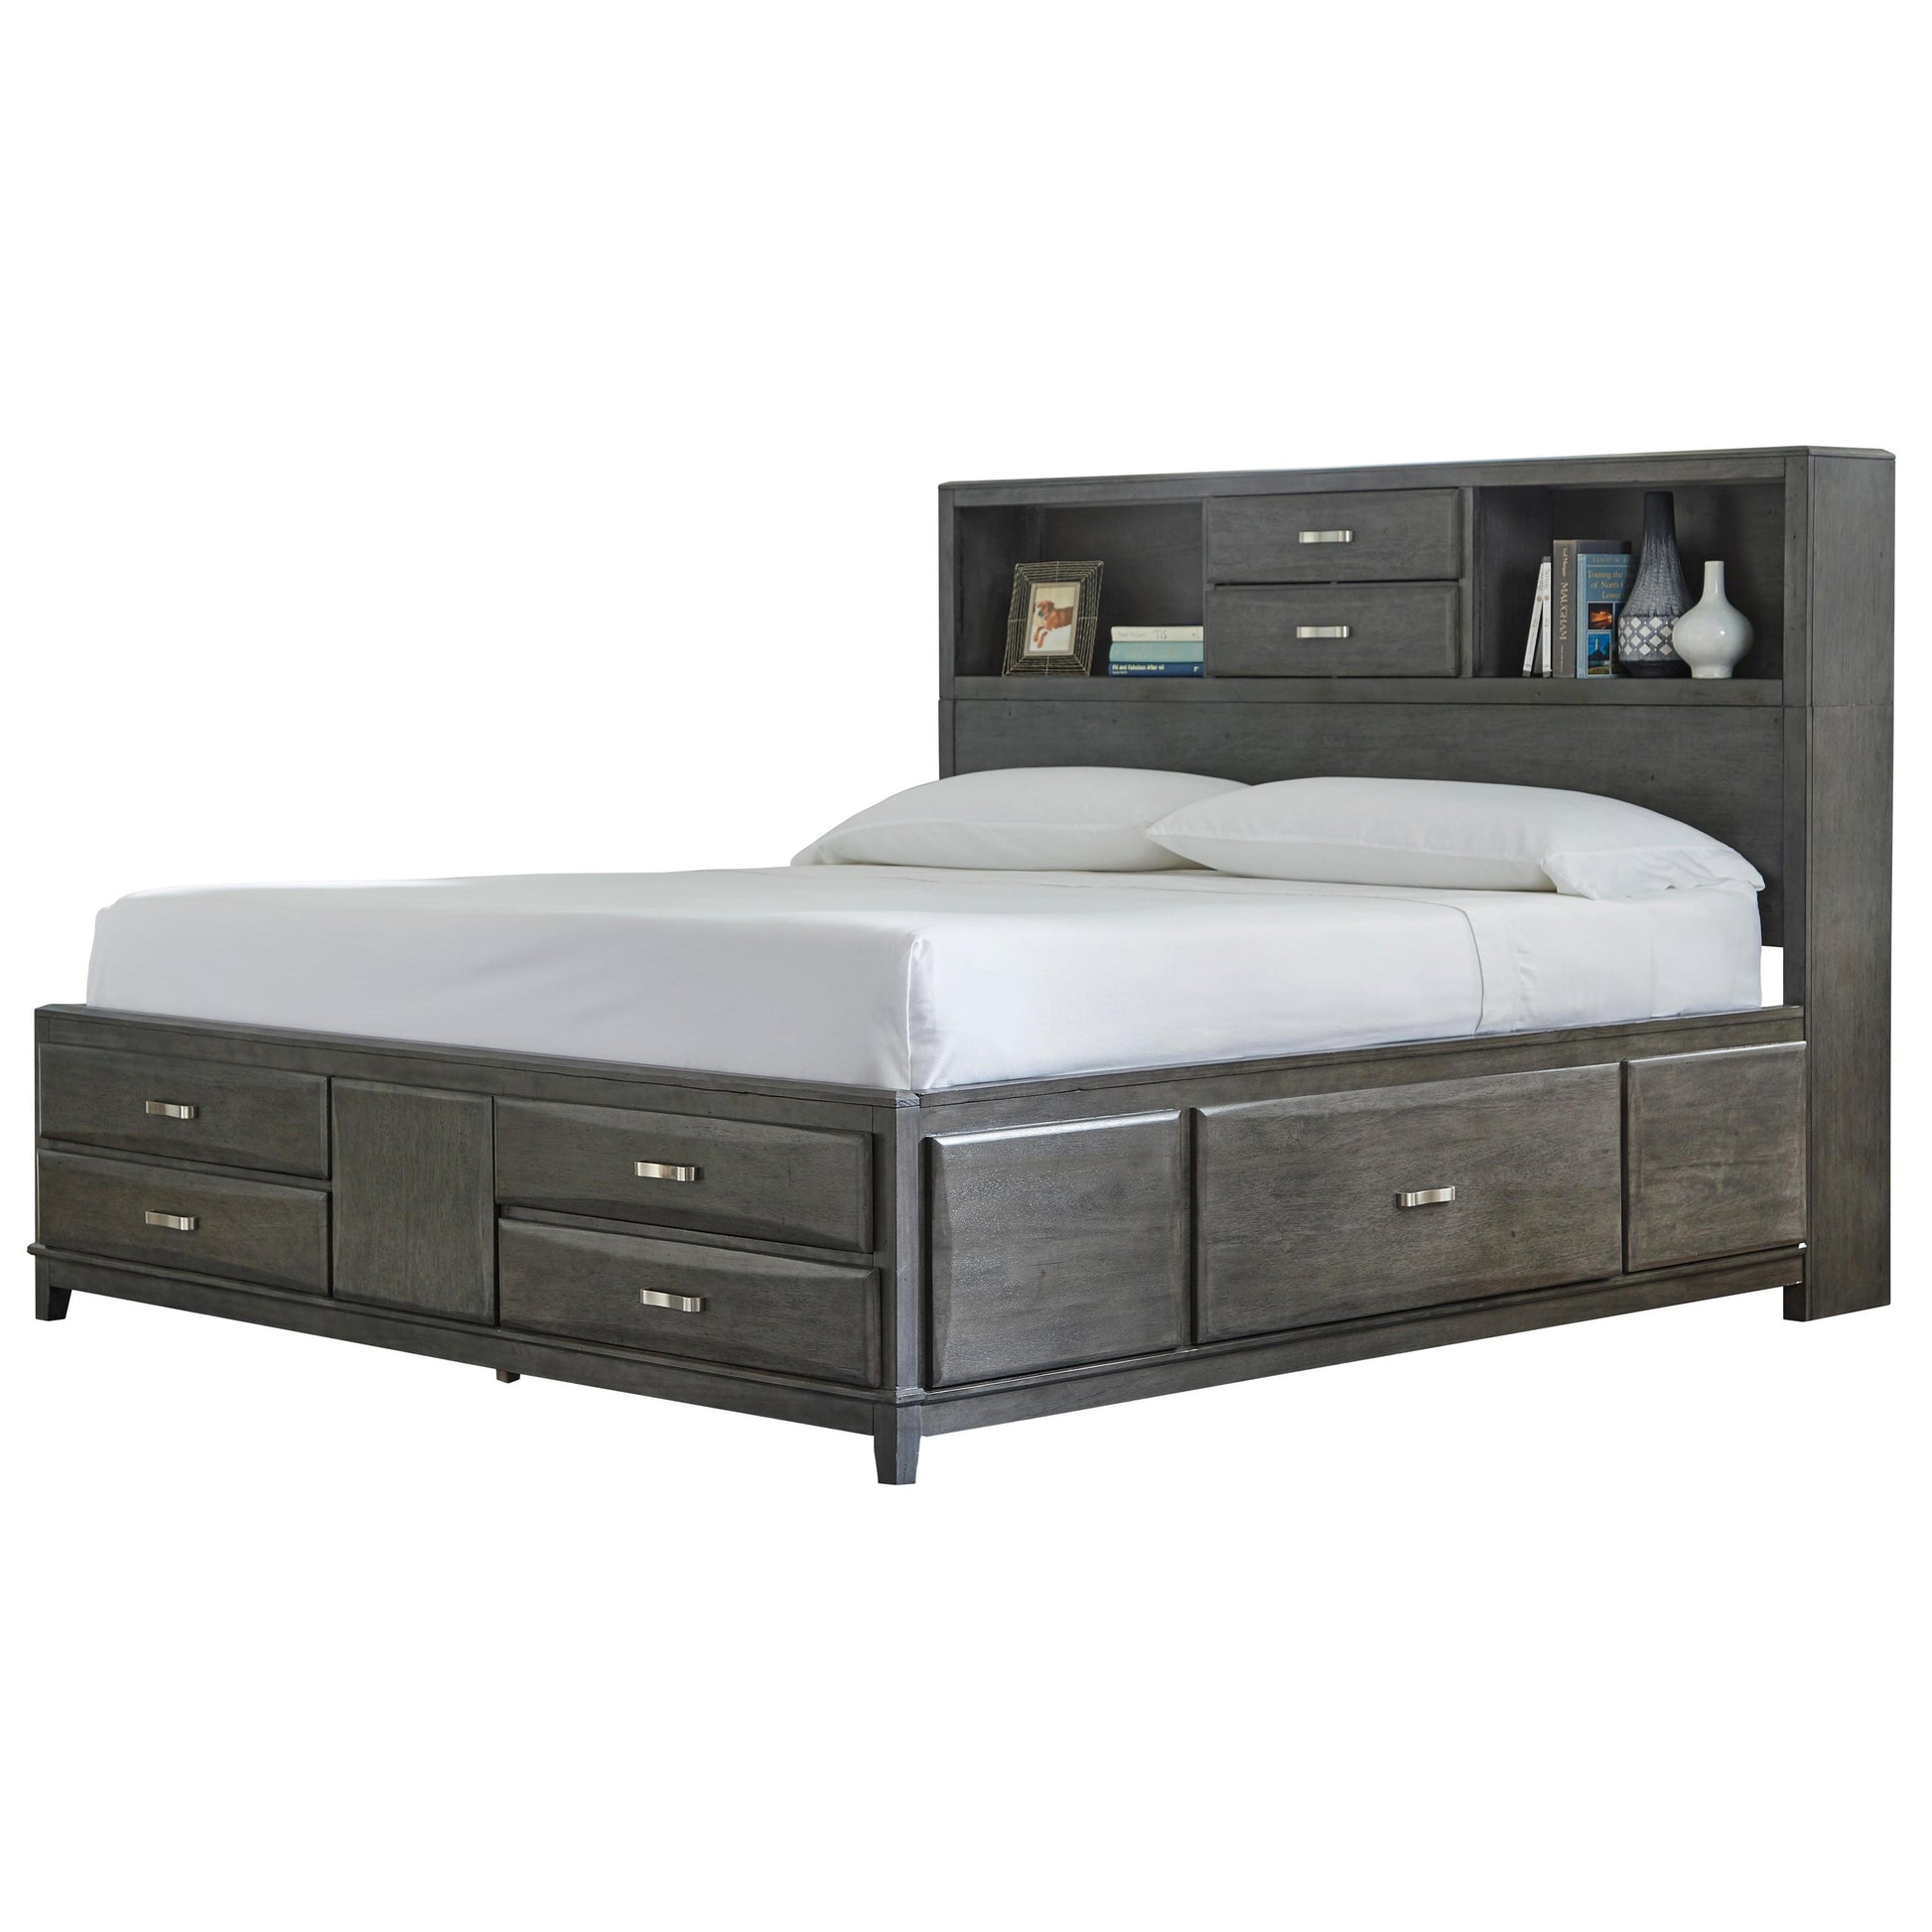 Signature Design by Ashley Caitbrook King Bookcase Bed with Storage B476-69/B476-66/B476-99